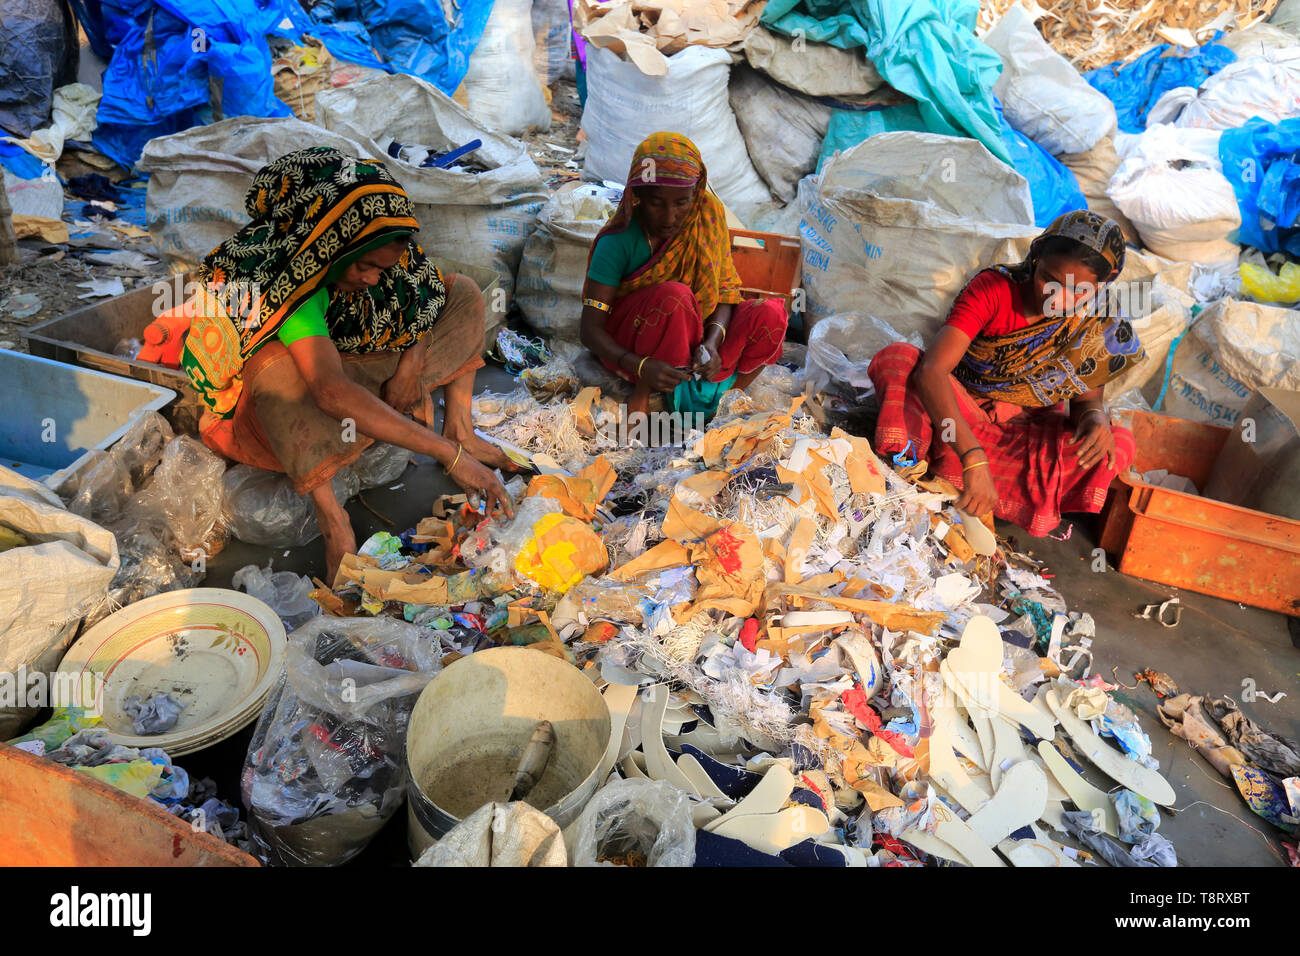 Women are looking for usable items among the plastic waste at Tongi in Gazipur. Bangladesh. Stock Photo